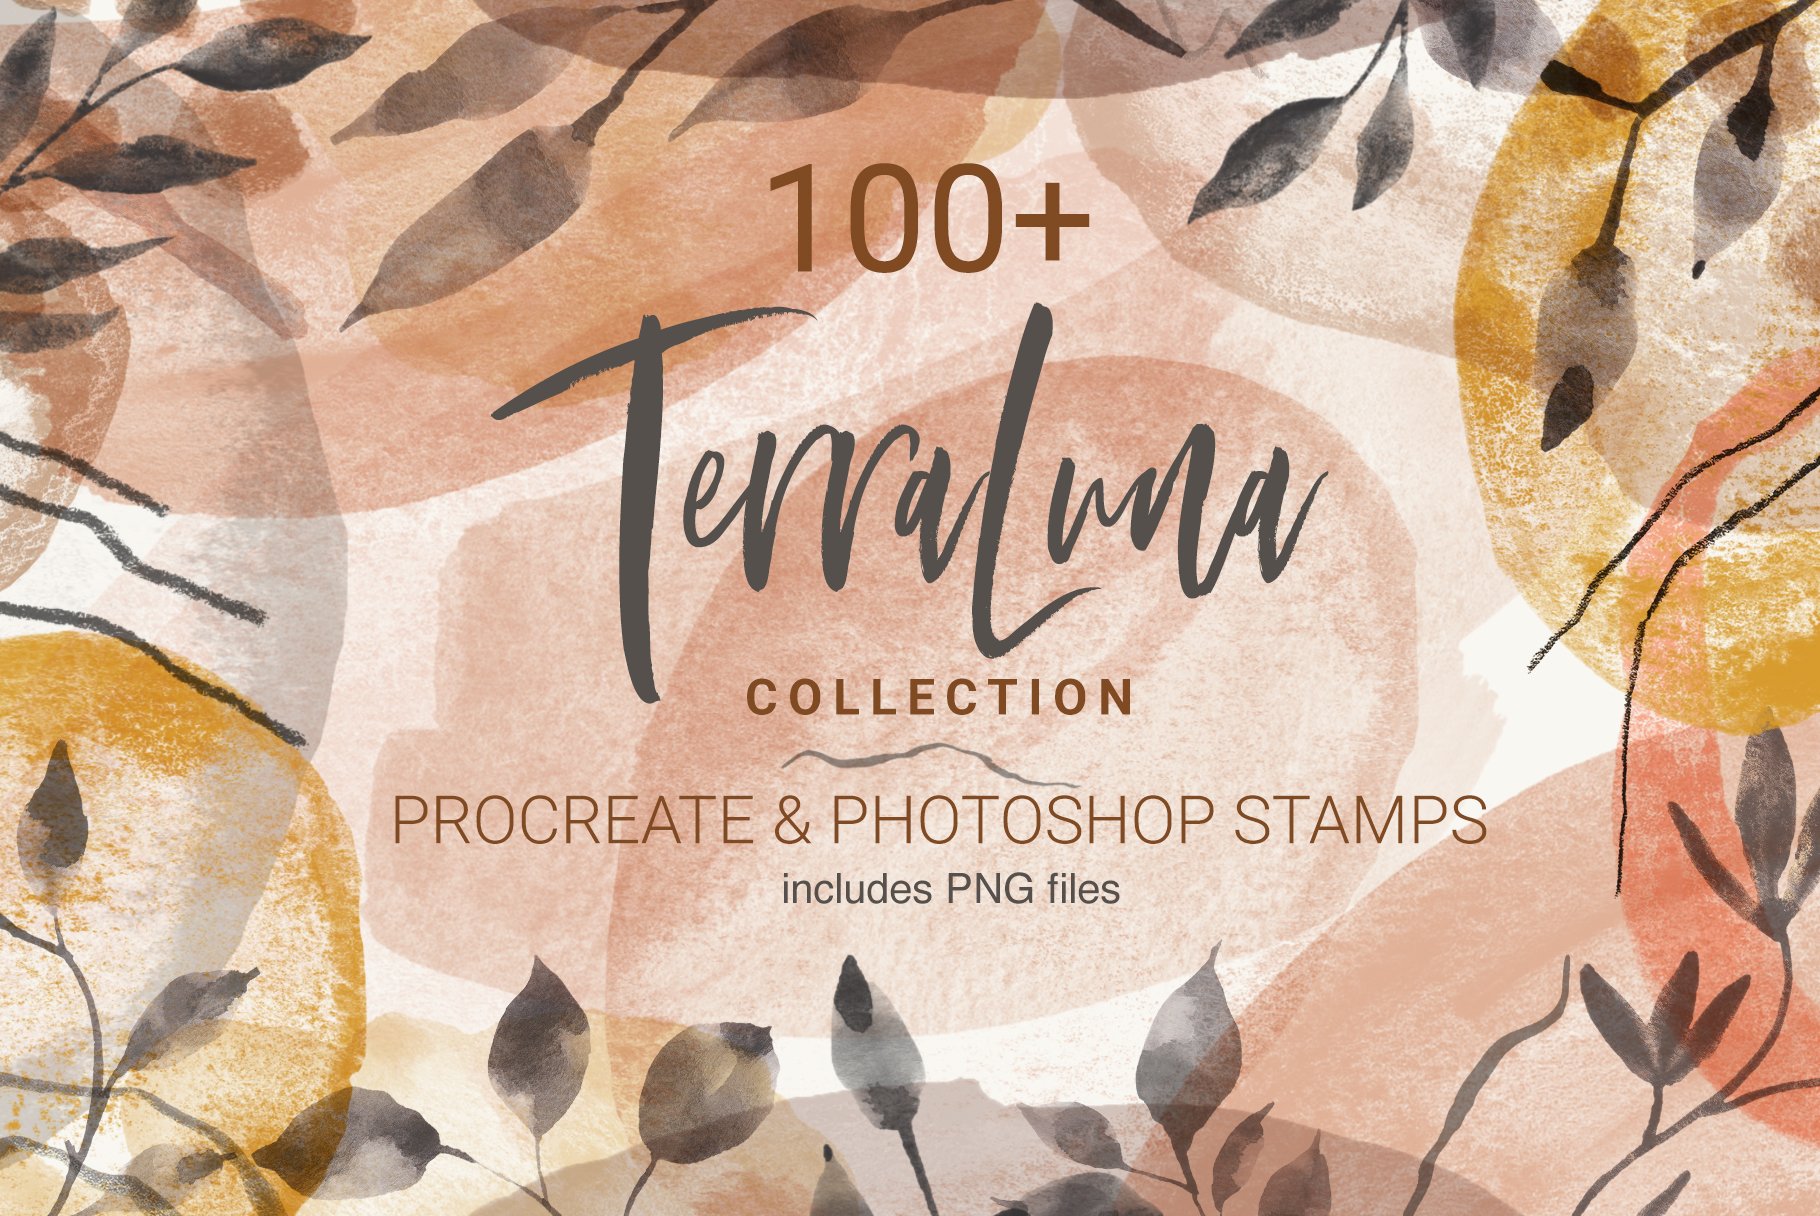 TerraLuna Stamp Collectioncover image.